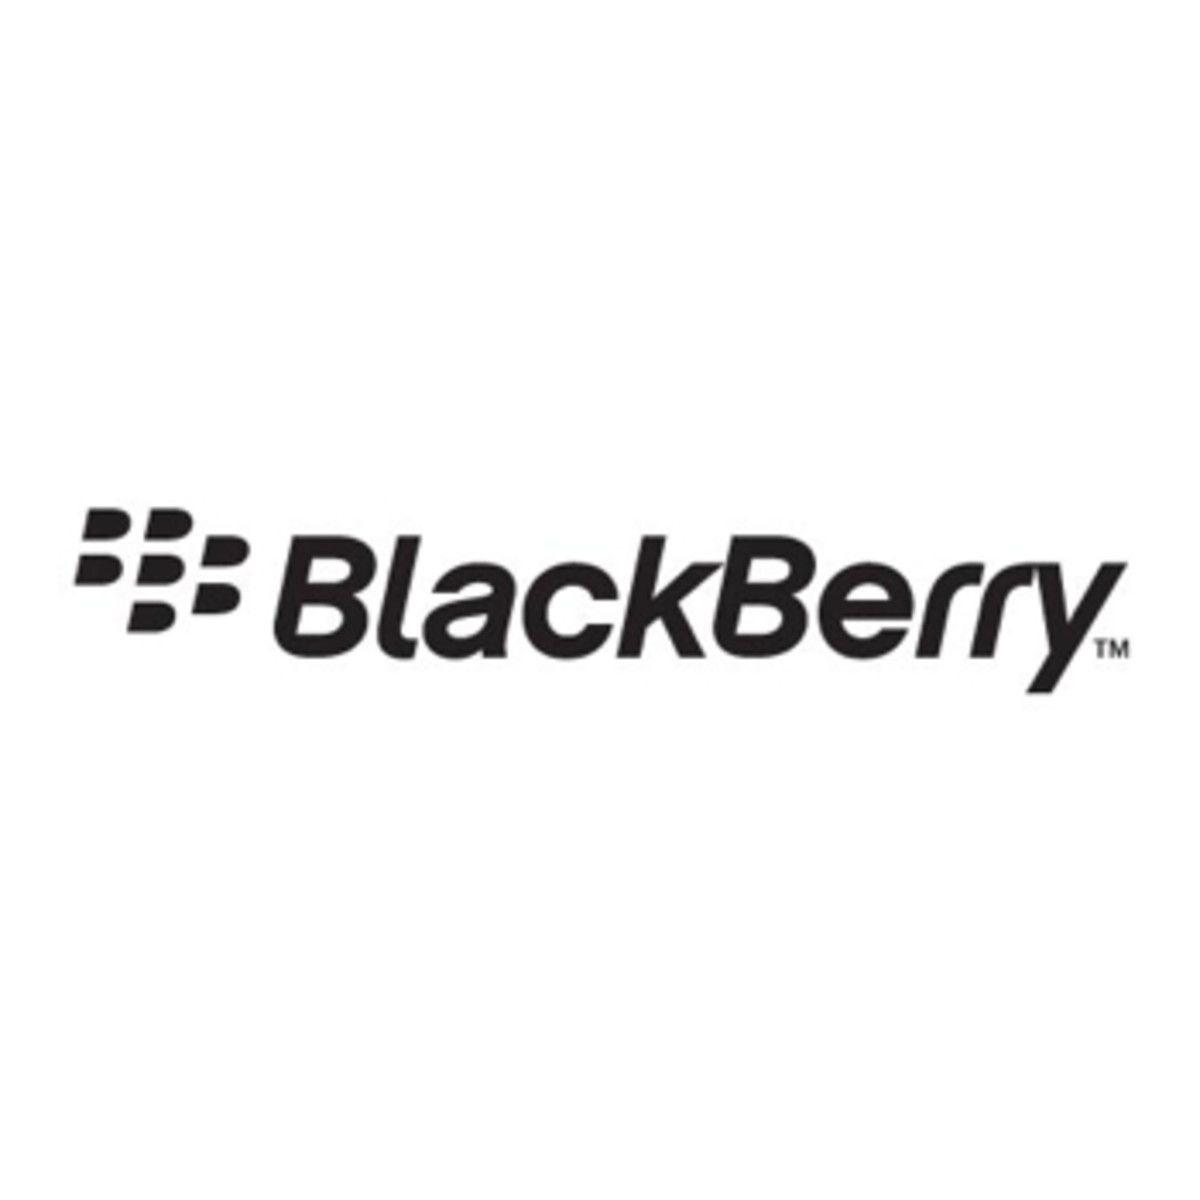 BlackBerry Company Logo - BlackBerry to renew company by focusing on 'core business drivers ...